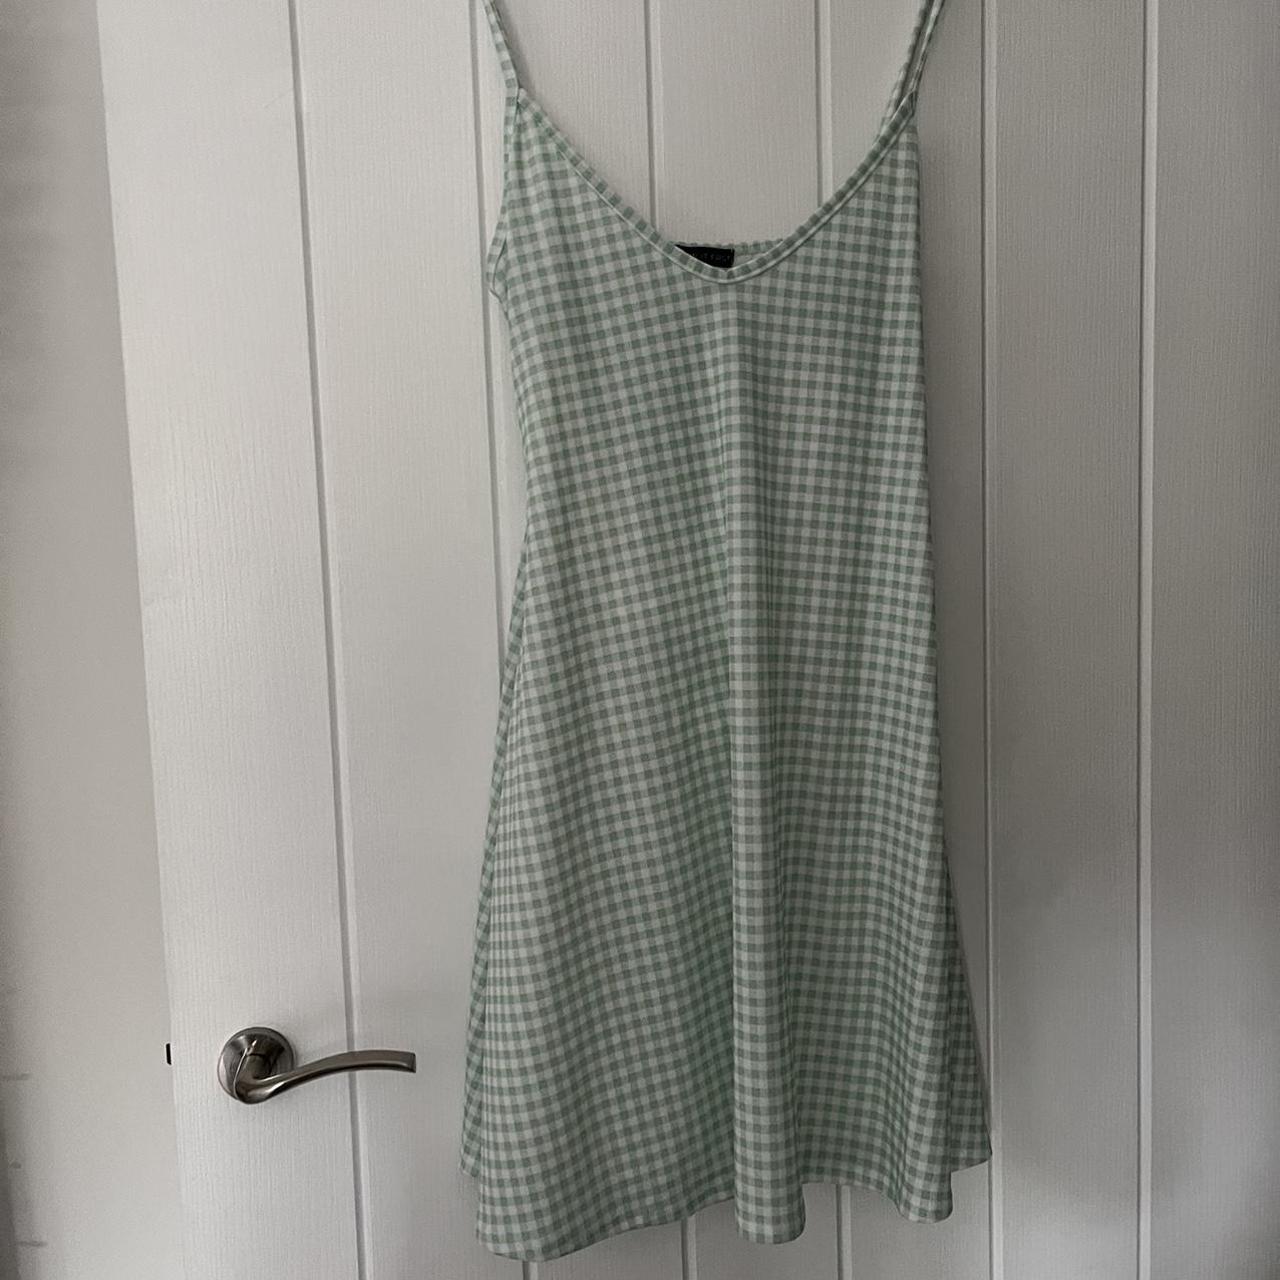 Mint gingham style strappy dress, brand new without... - Depop